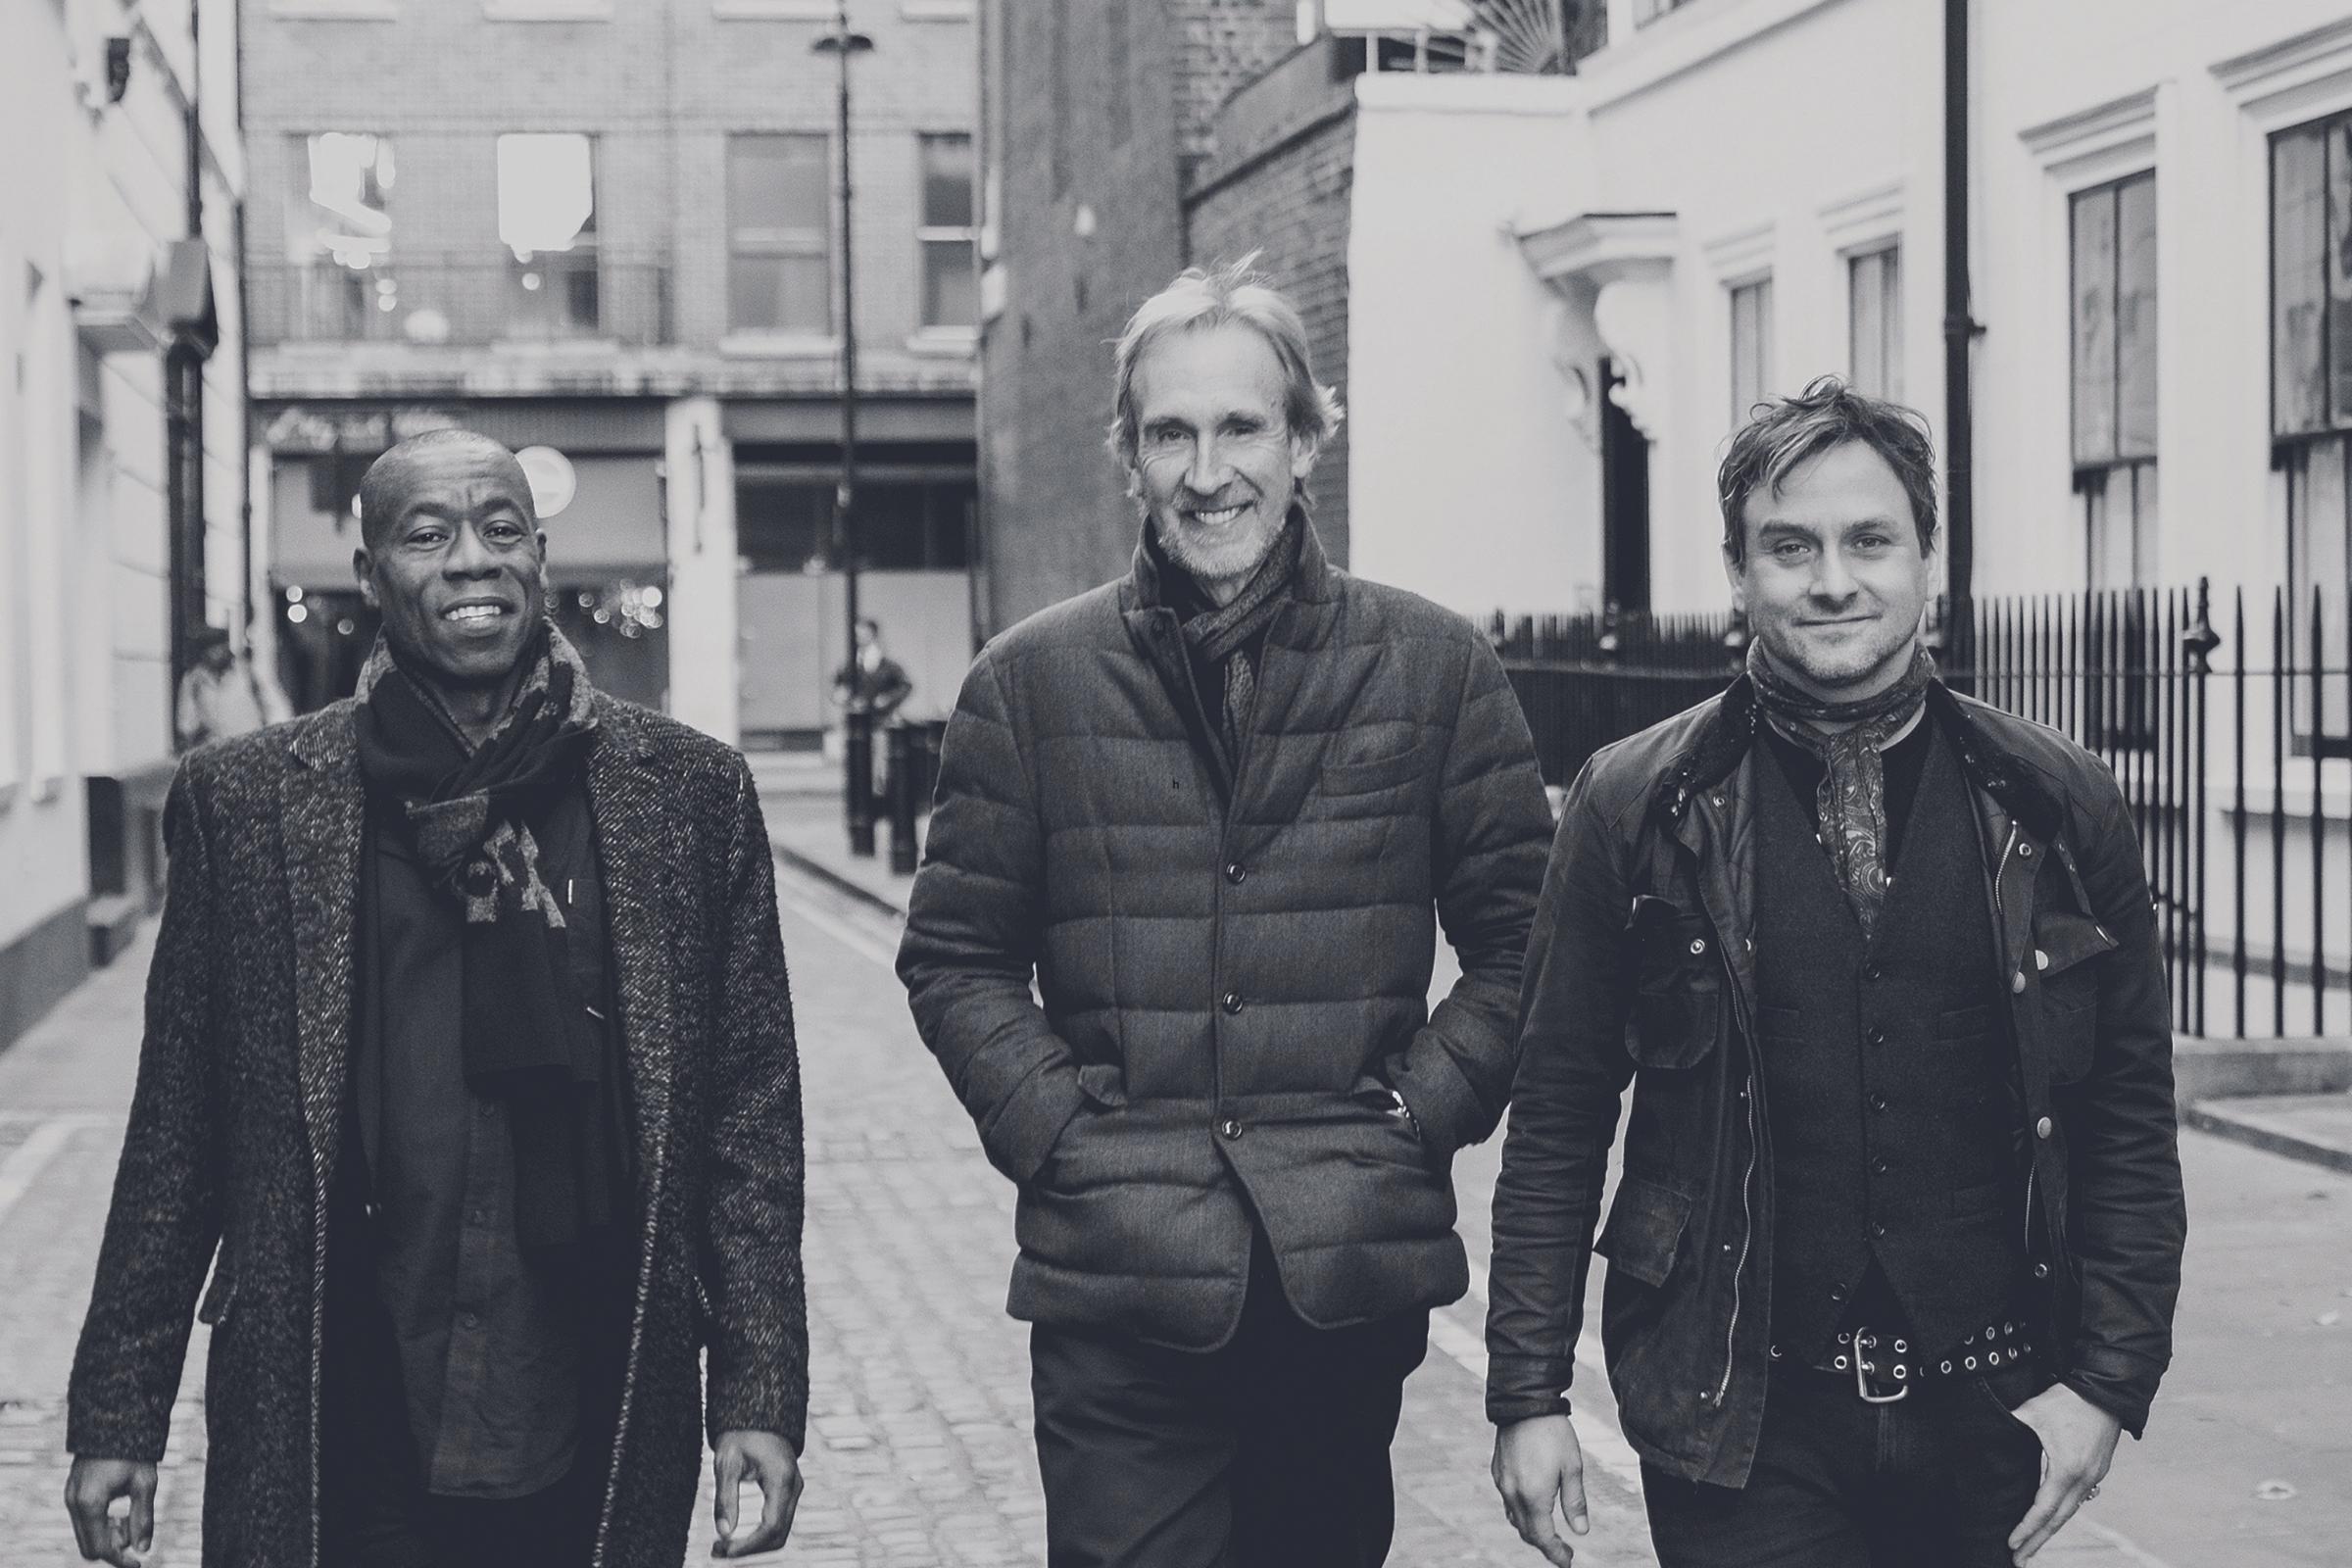 Mike and the Mechanics announce UK tour including Glasgow's Royal Concert Hall